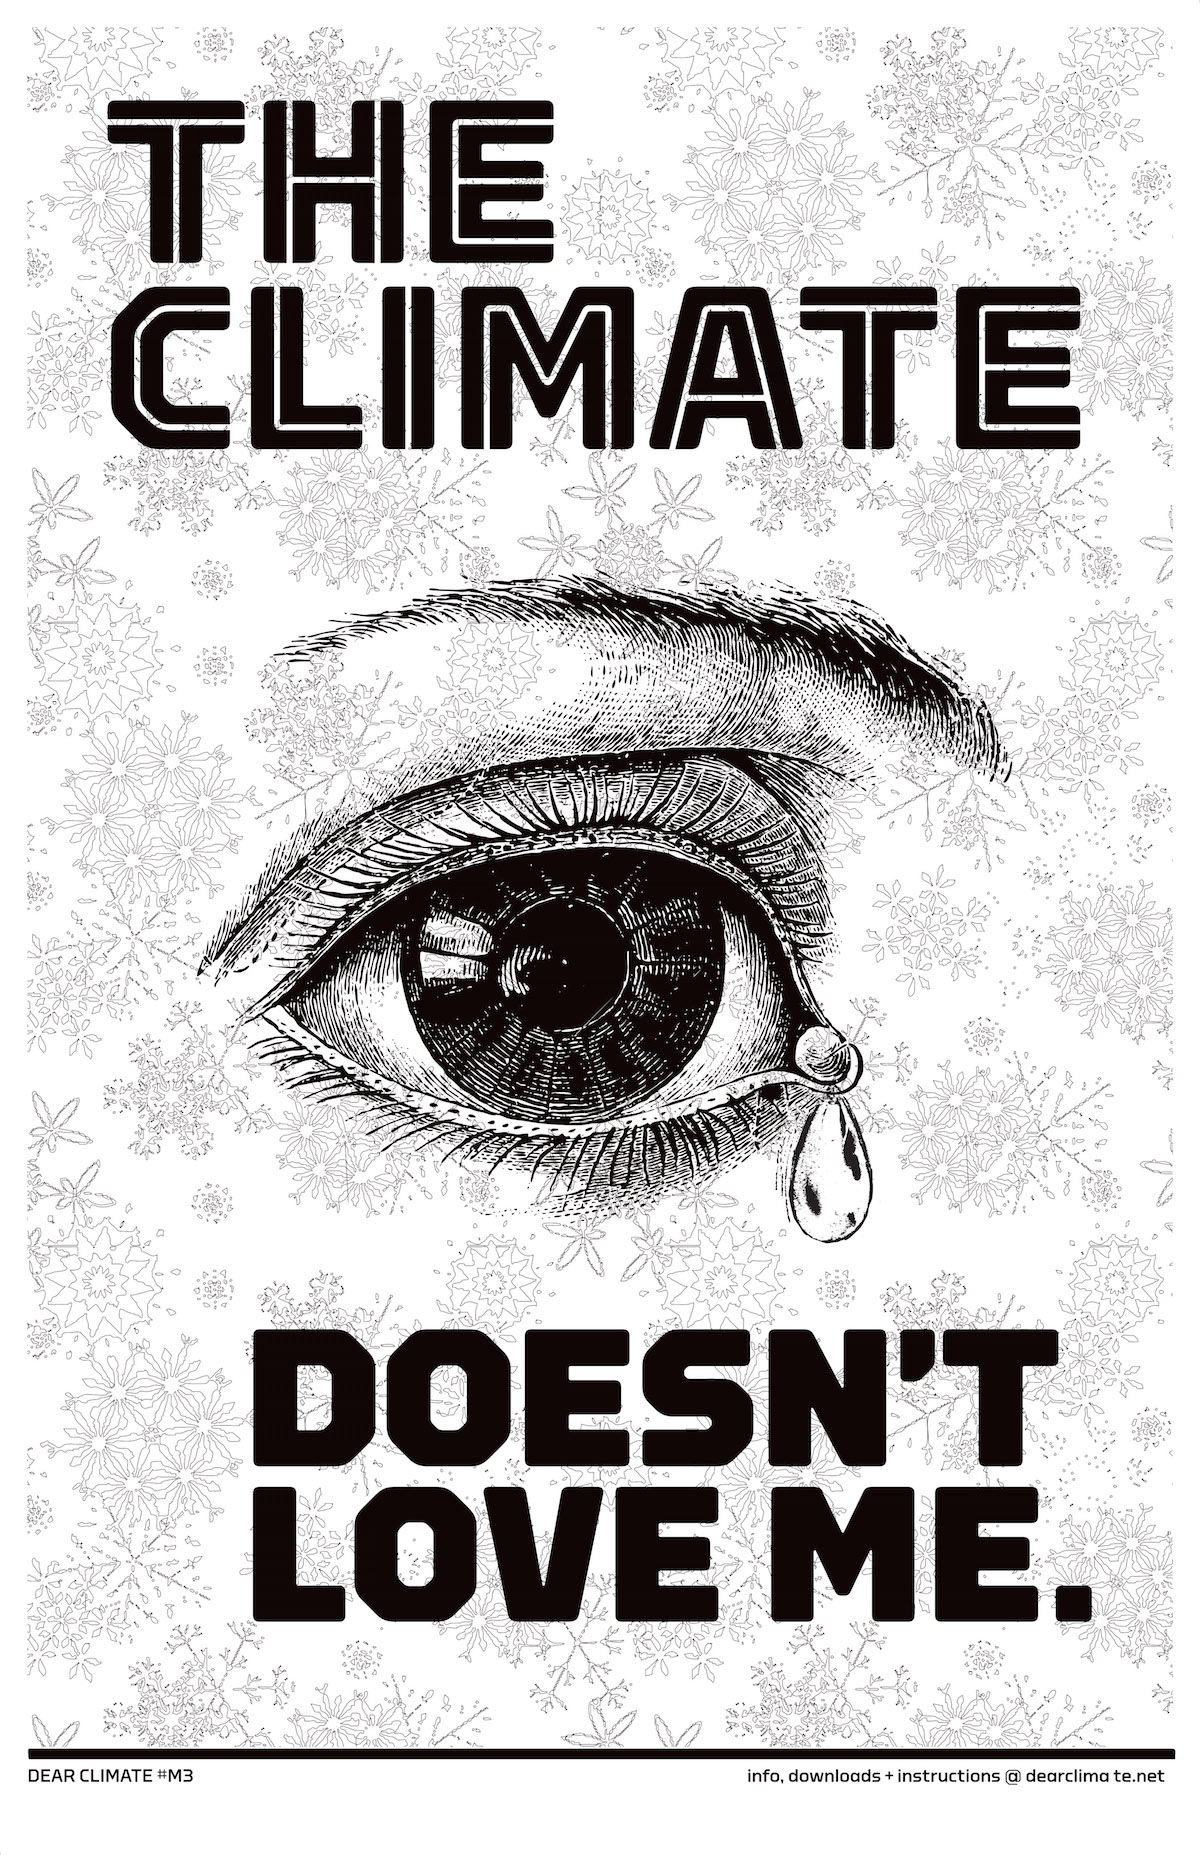 The Climate Doesn't Love Me poster